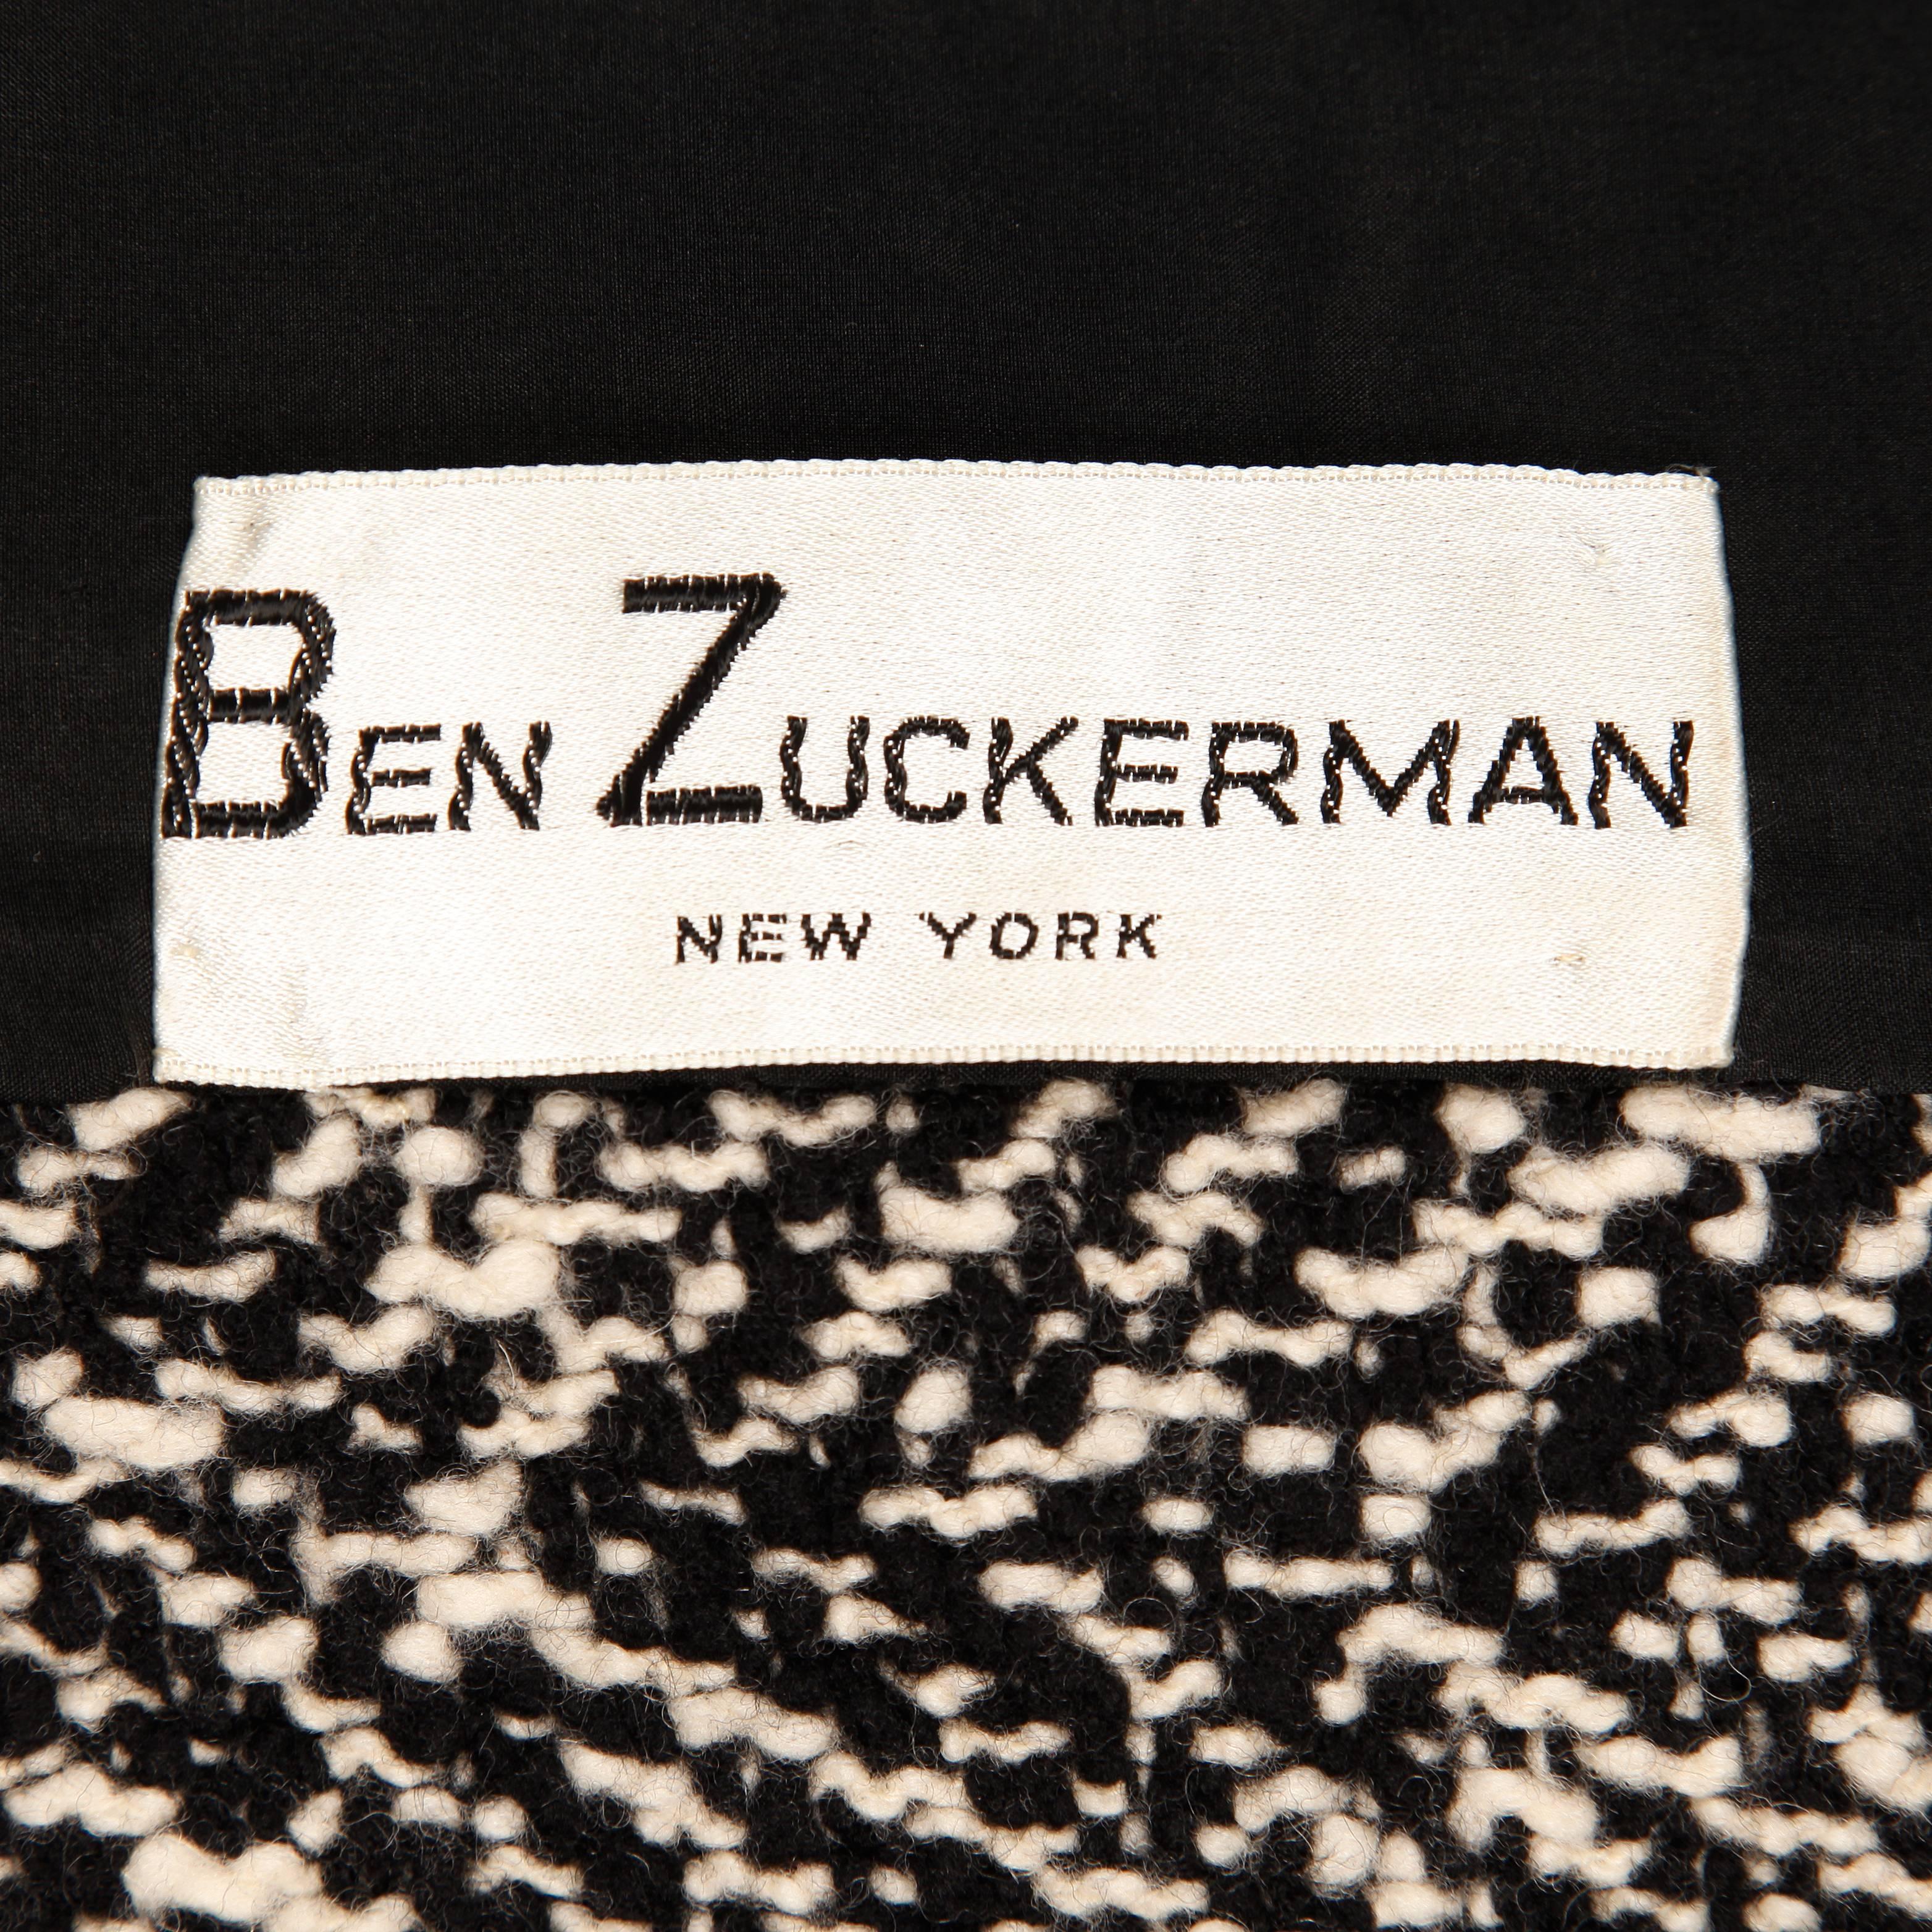 Heavy weight woven herringbone wool jacket with genuine Persian lamb fur trim by Ben Zuckerman for Bergdorf Goodman. Stunning construction with hand finished detailing throughout the jacket.

Details: 

Fully Lined
Estimated Size: